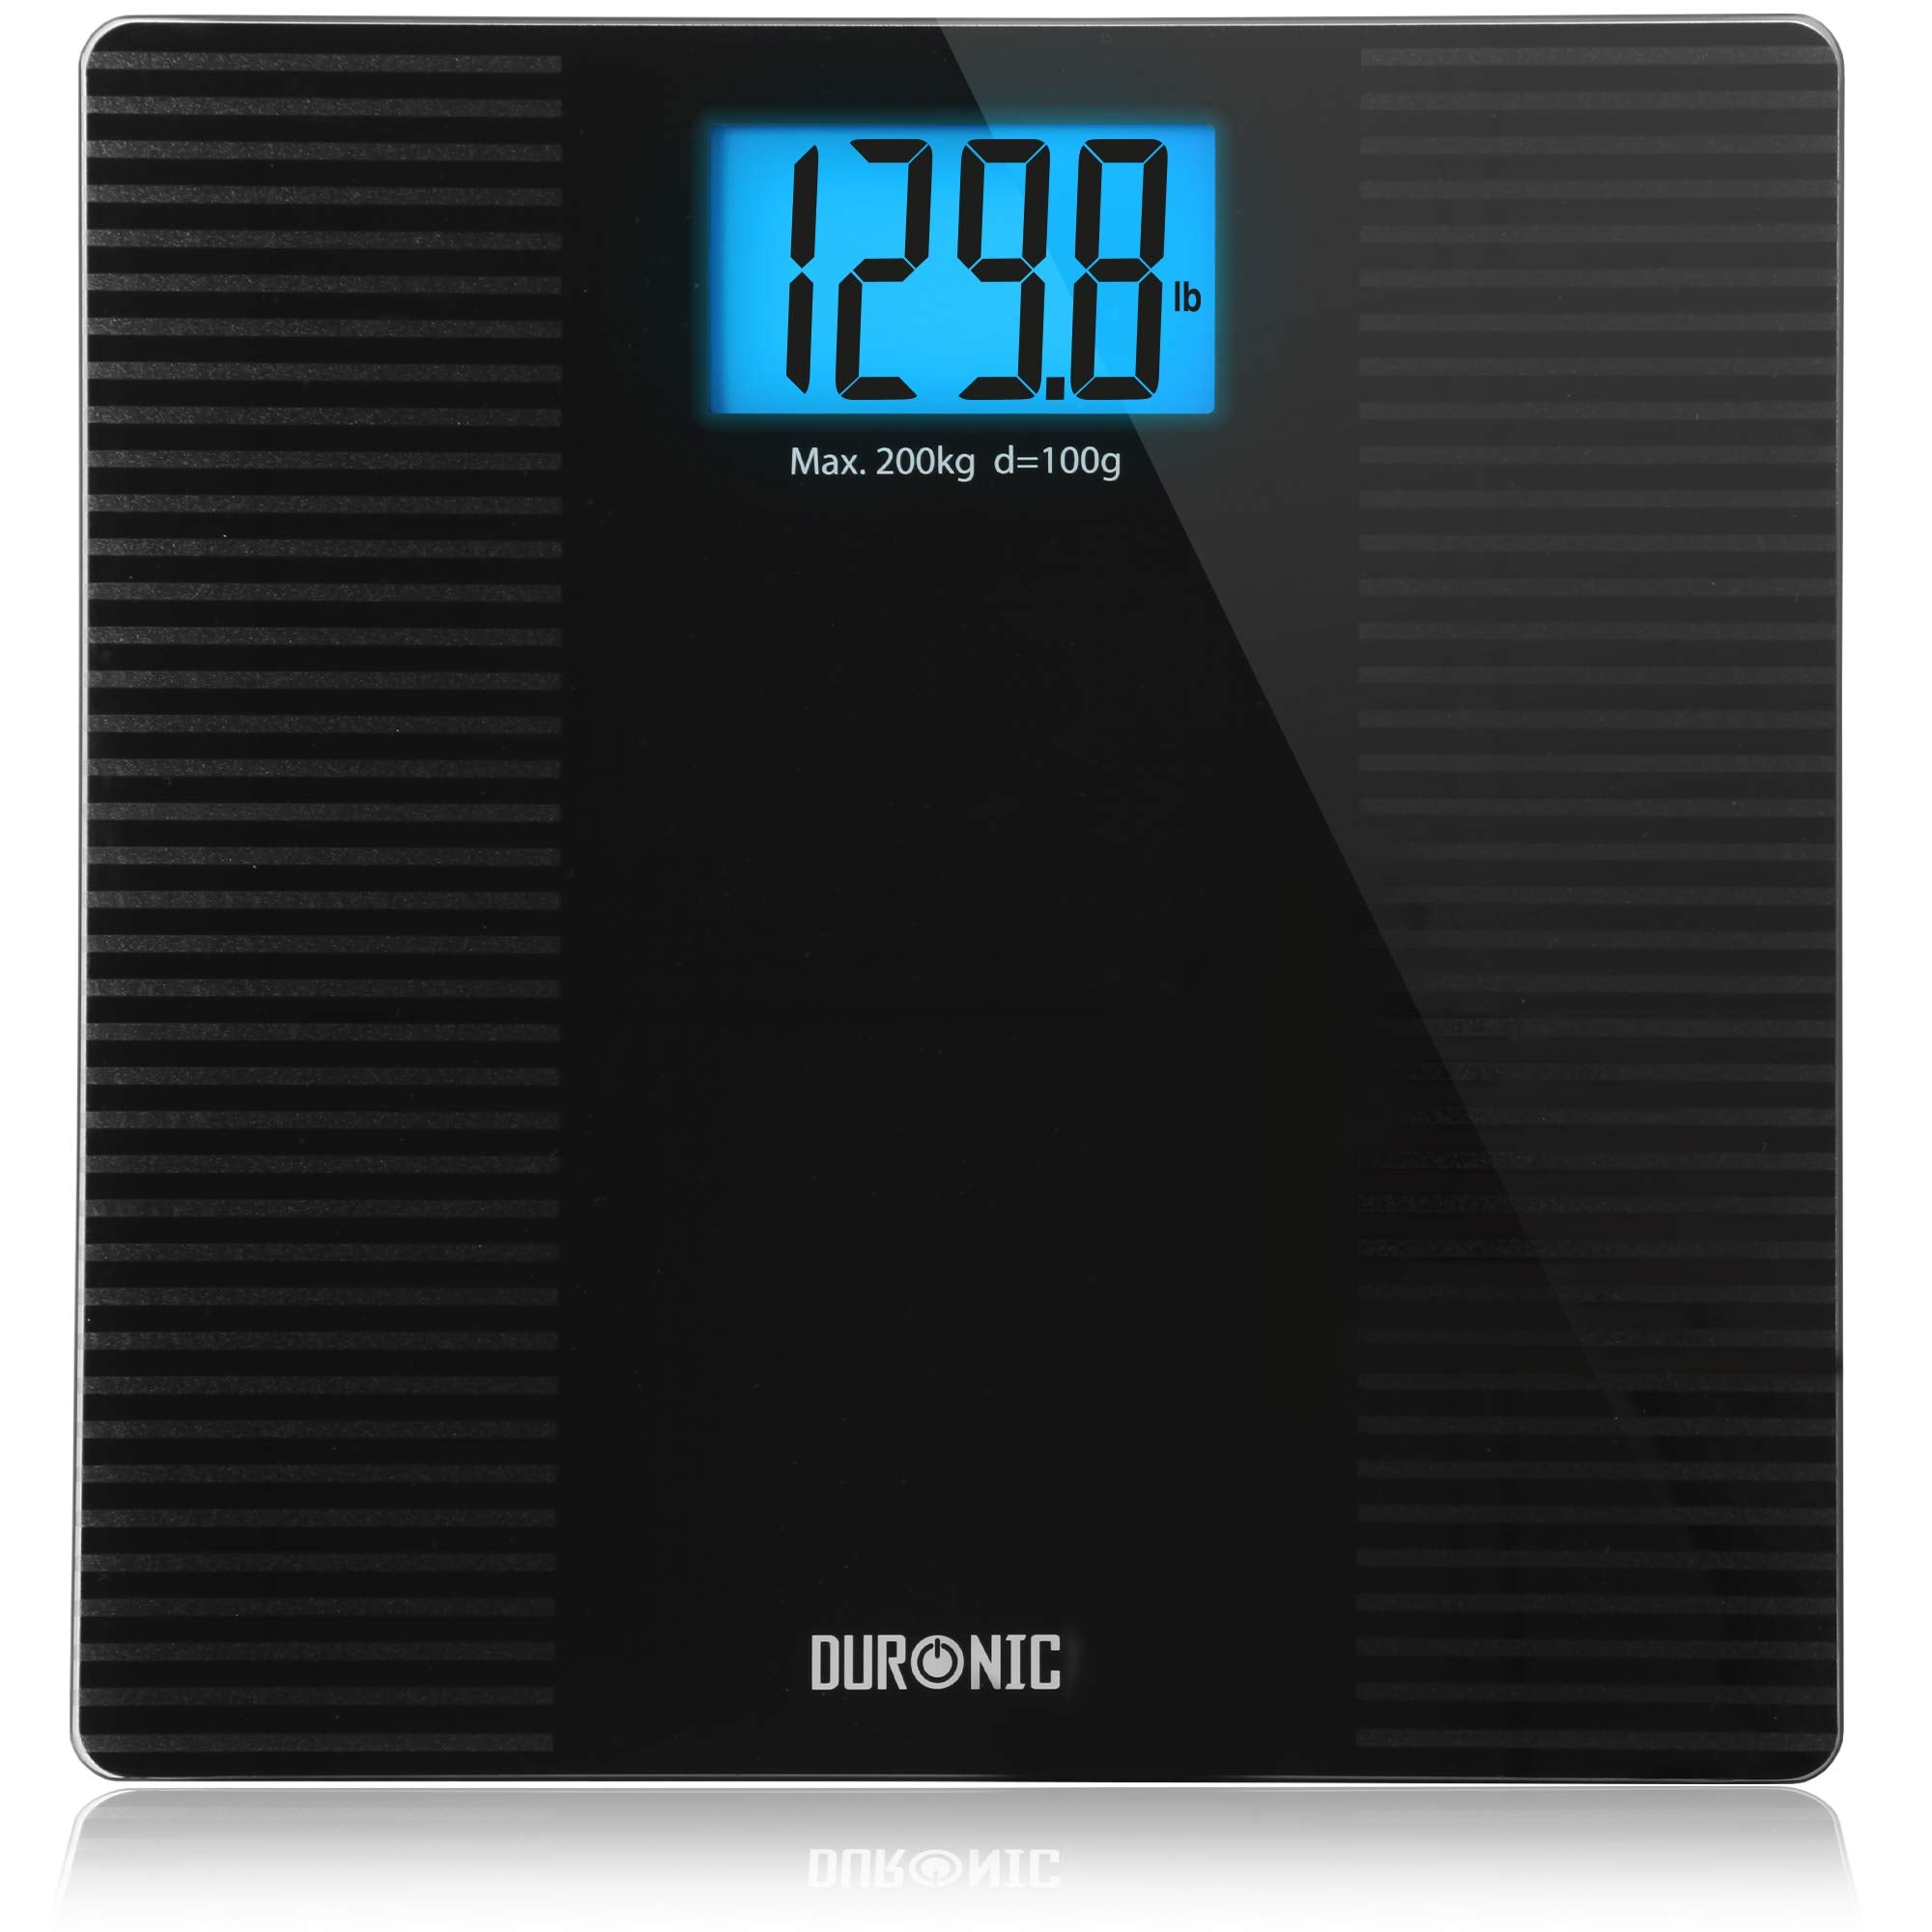 Duronic Body Scales BS203 | Measures Body Weight in Kilograms, Pounds and Stones | Black Non-Slip Design | Step-On Activation Bathroom Scales | Precision Sensors | XL Digital Display | 200kg Capacity